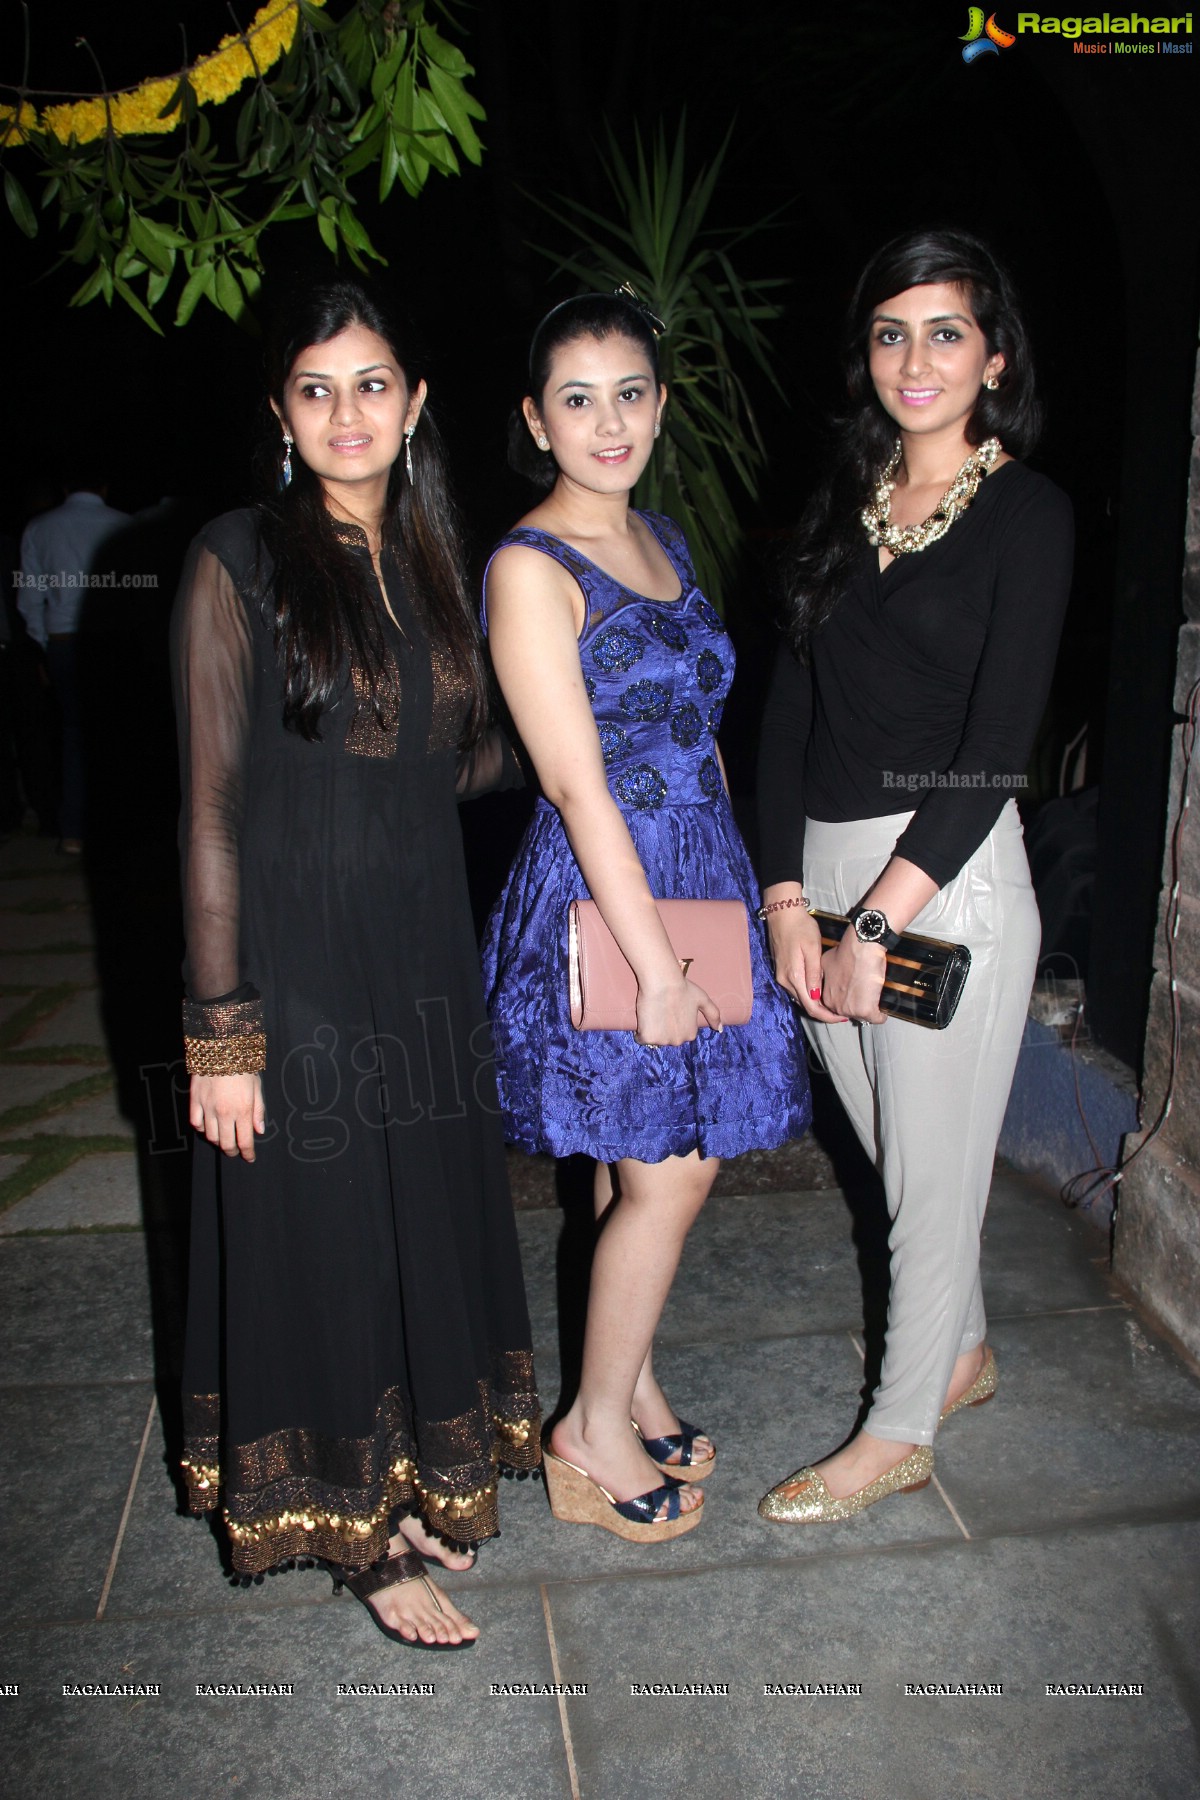 Vikram Phadnis Hyderabad Stores Launch Party